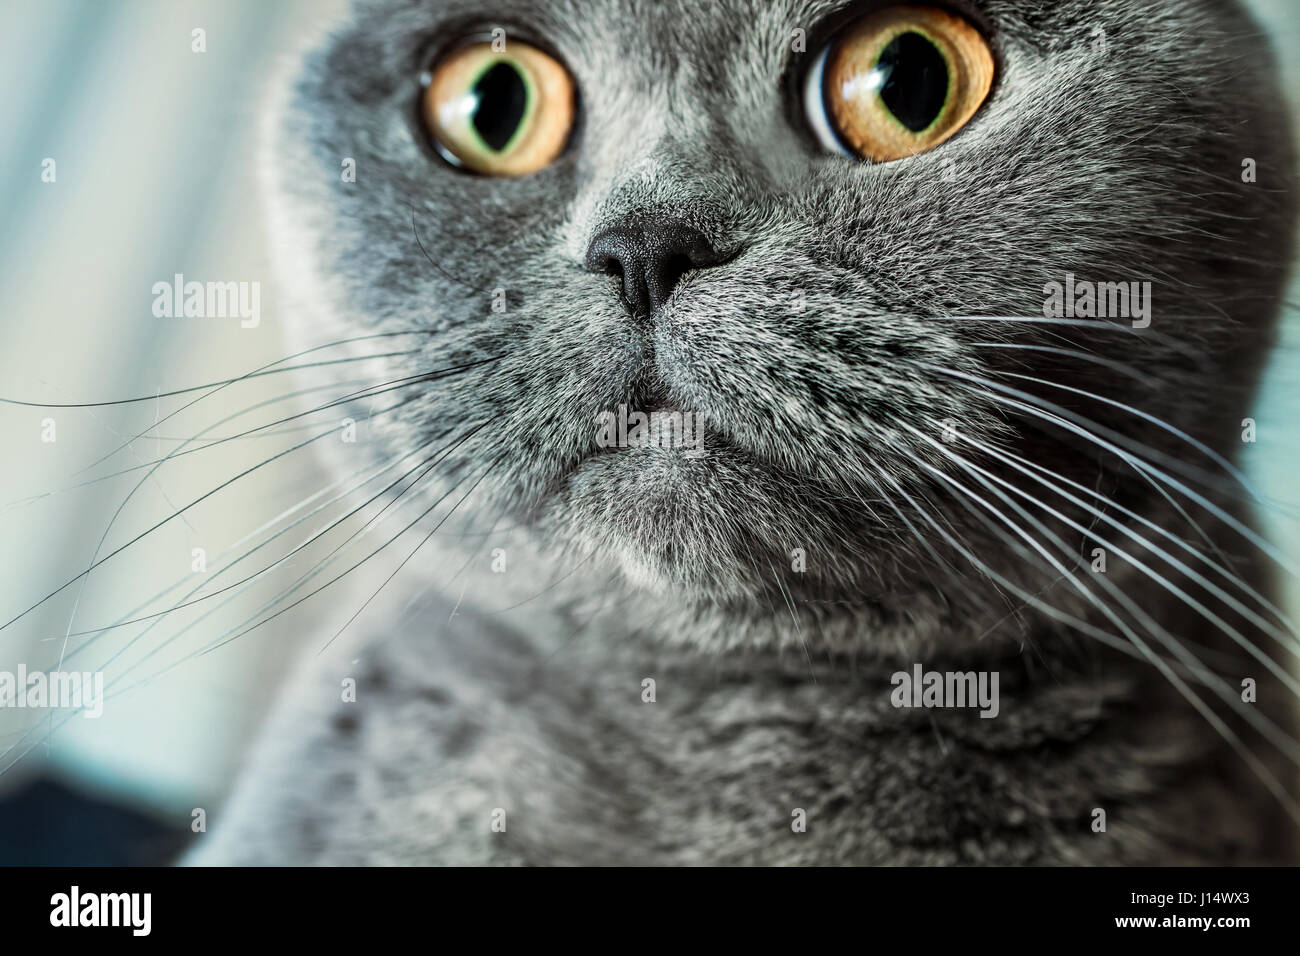 Portrait of  gray British shorthair cat with dumbfounded look Stock Photo